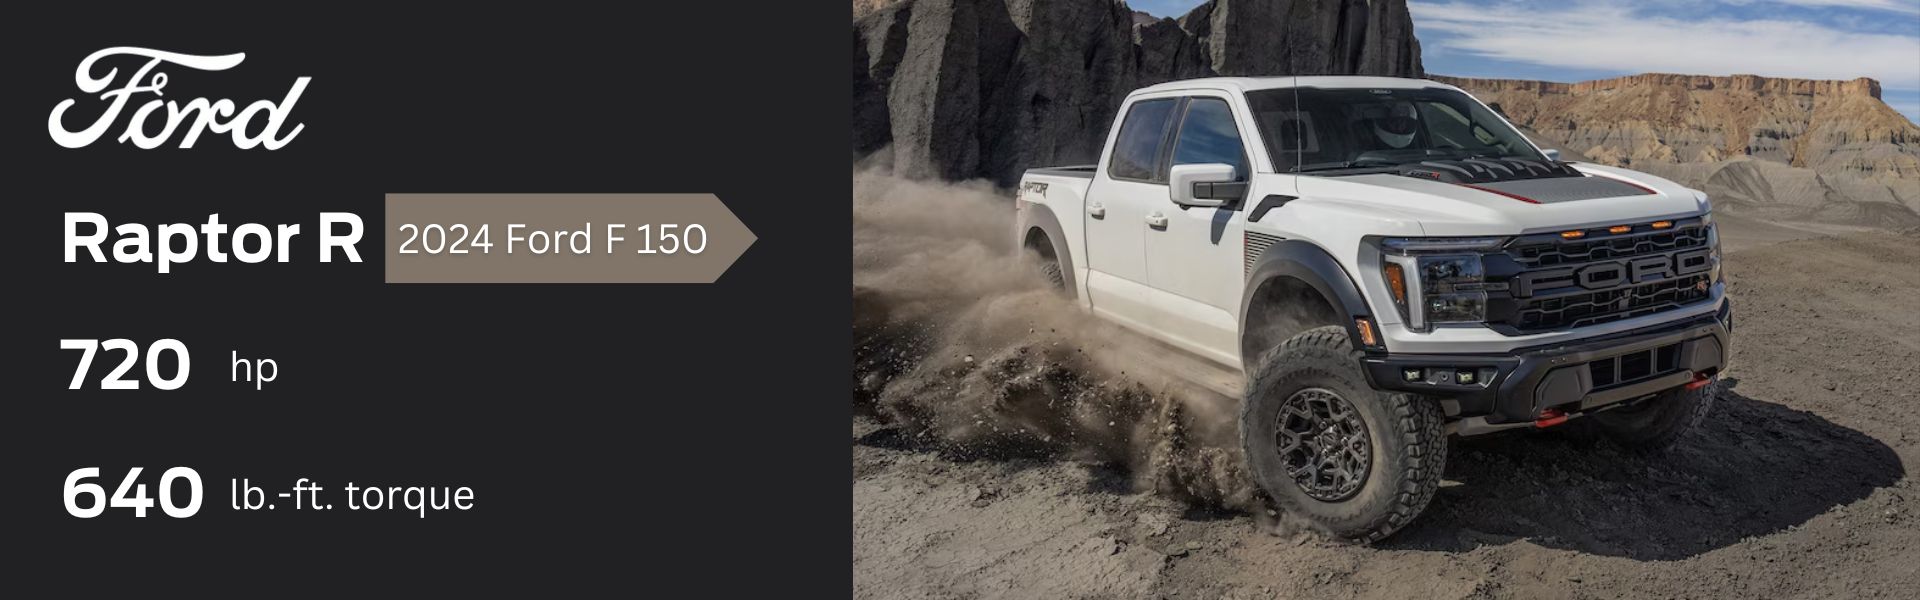 The Evolution of the Ford F-150 Raptor - Brattleboro Ford blog